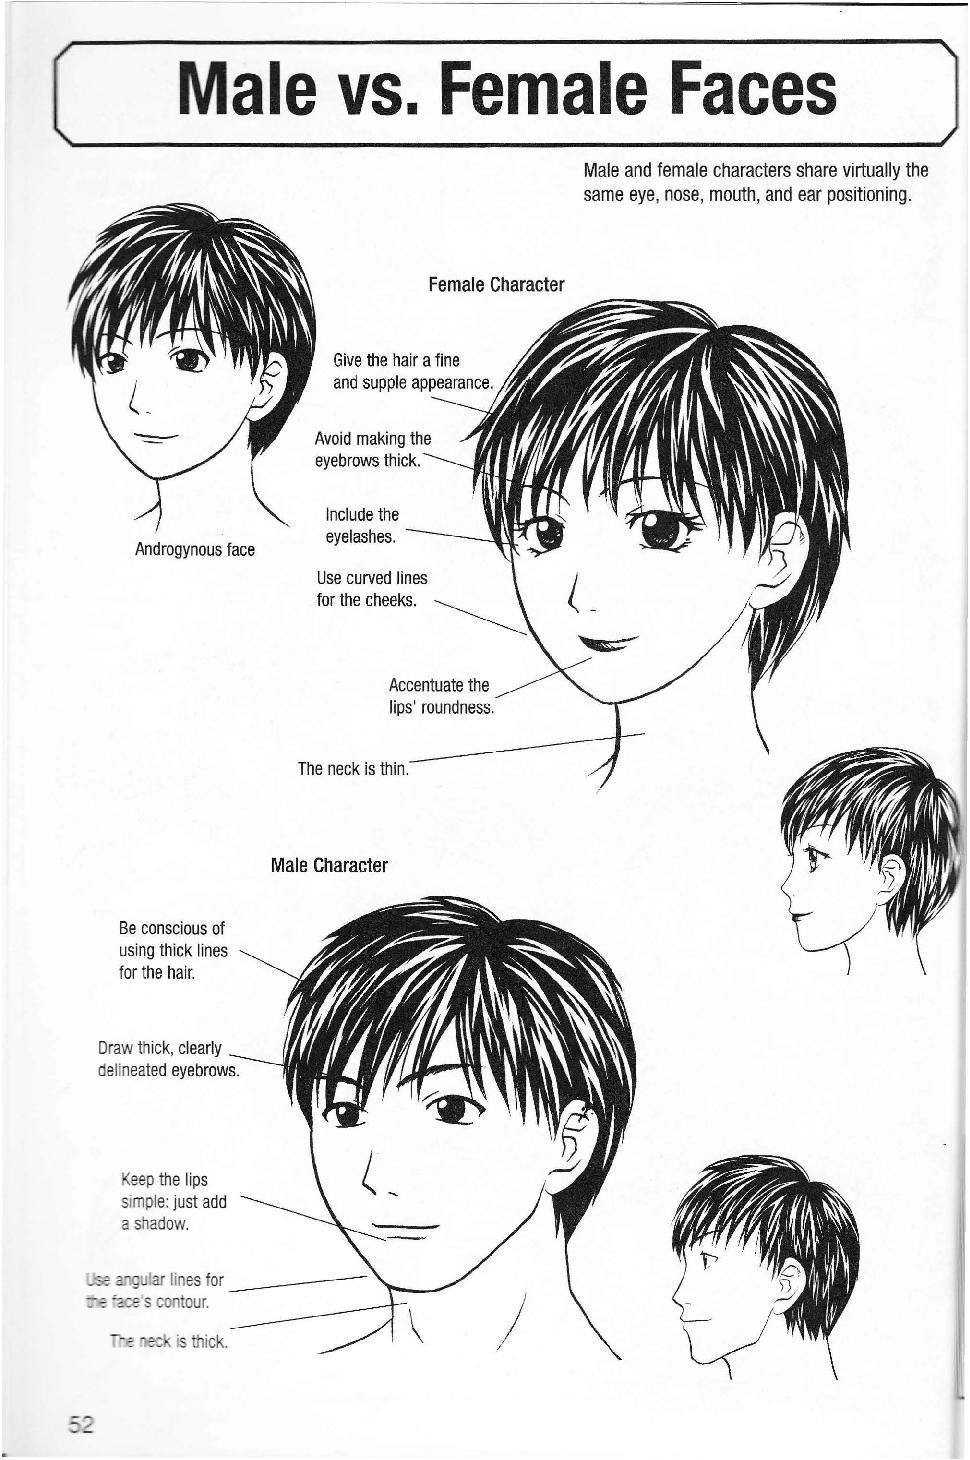 More How to Draw Manga Vol. 2 - Penning Characters 53